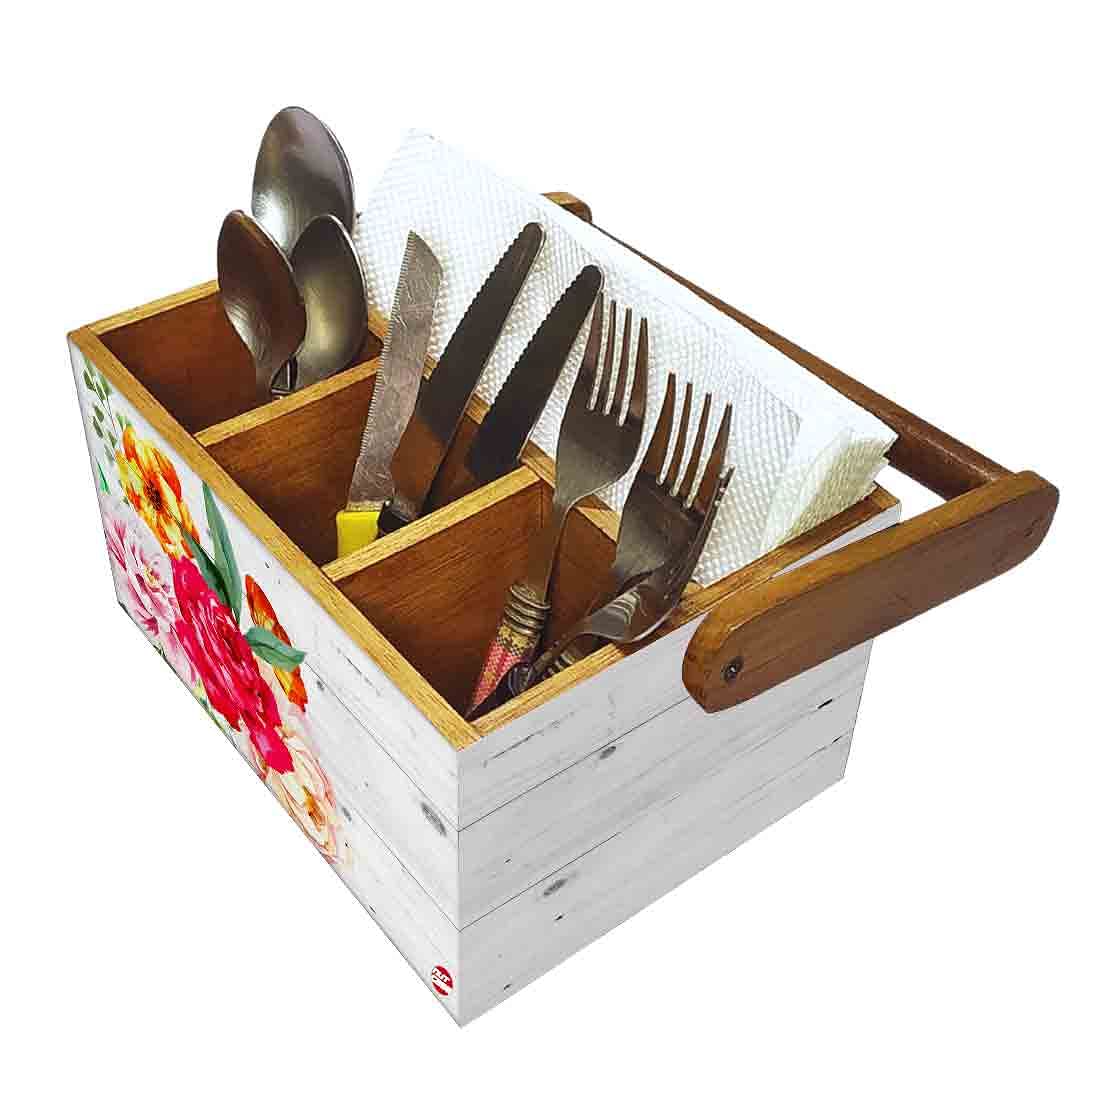 Cutlery Holder Spoon Stand for kitchen With Handle - Roses Nutcase